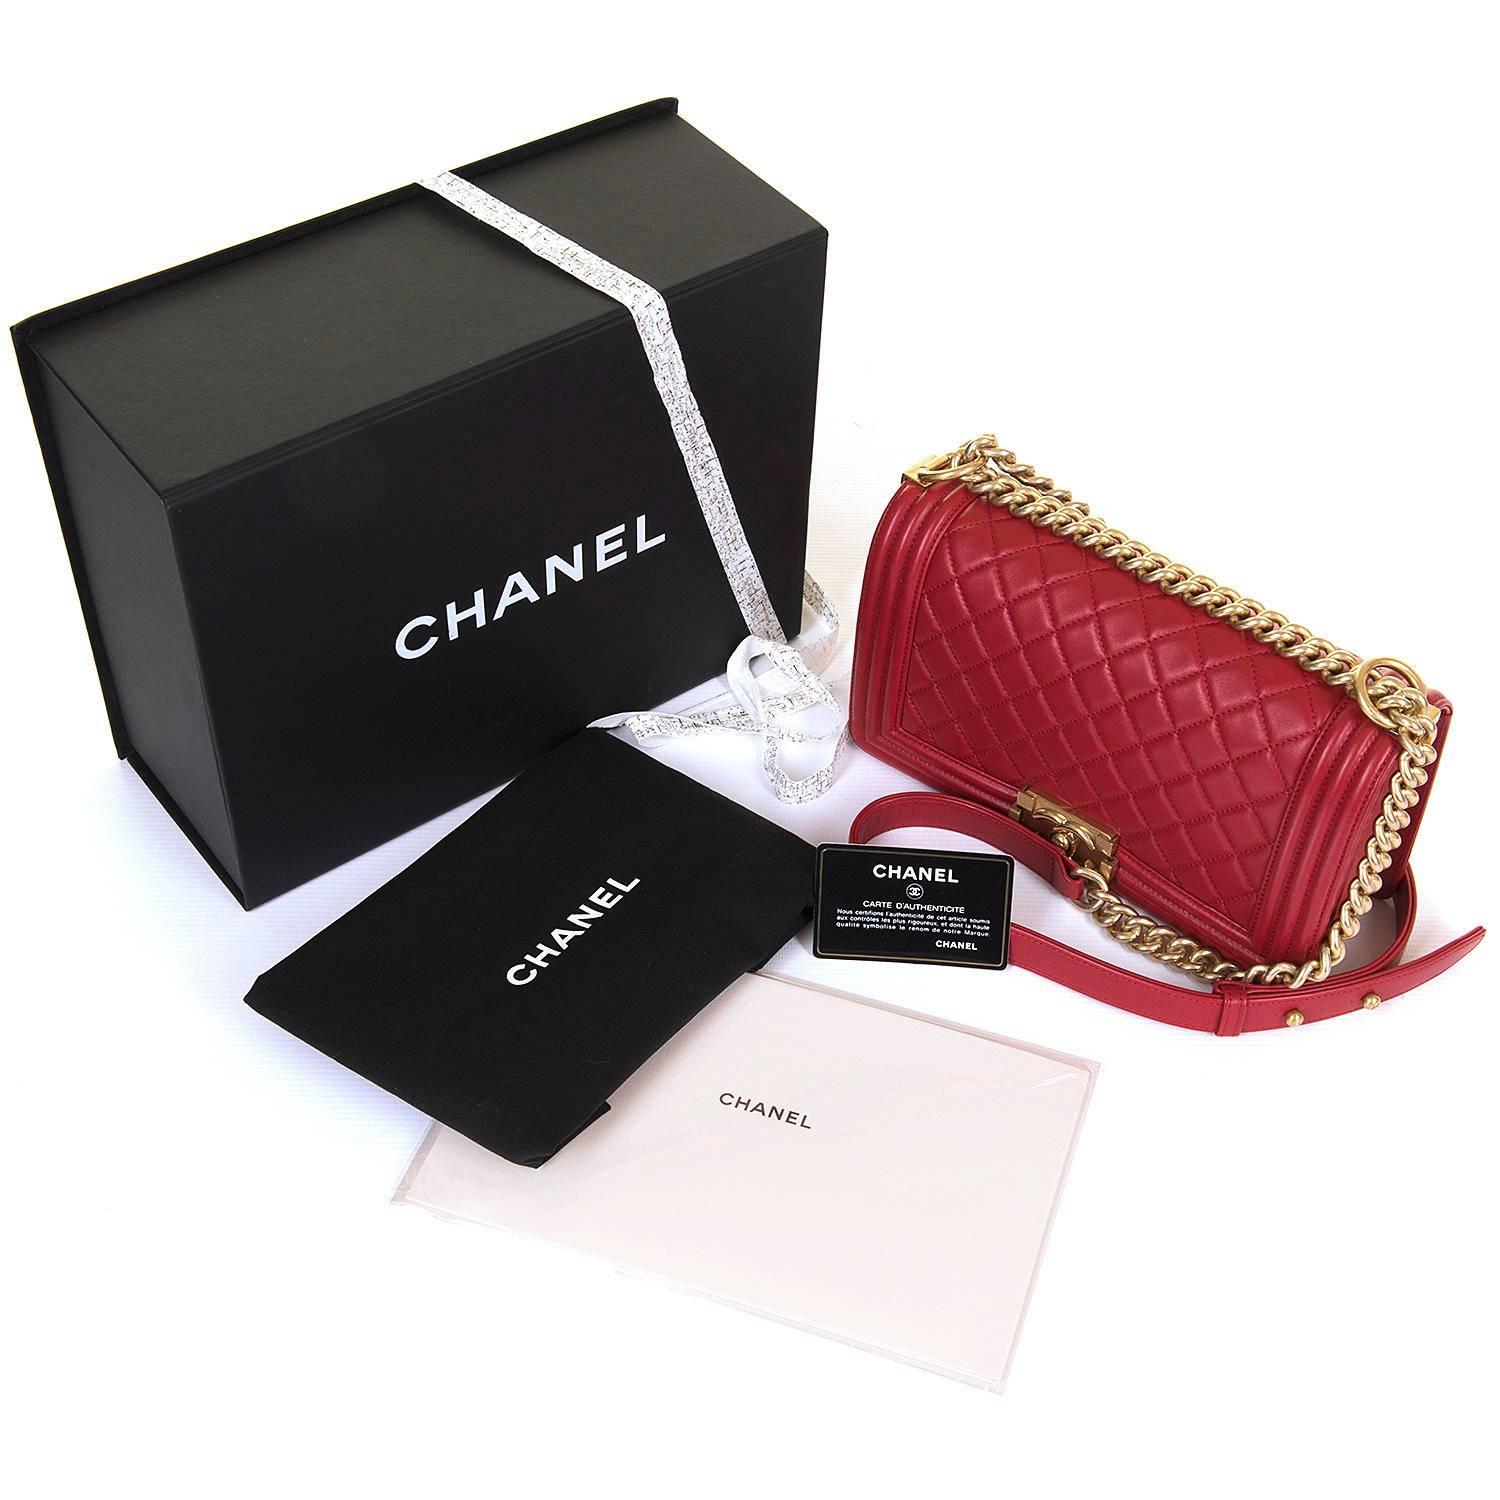 Absolutely stunning Chanel 'Imperial Red' New Medium Quilted boy bag with Gold hardware. This sizzling hot bag is in absolutely pristine, new condition and comes with it's original Box packaging & ribbon, dust sack and Authenticity & Care cards.